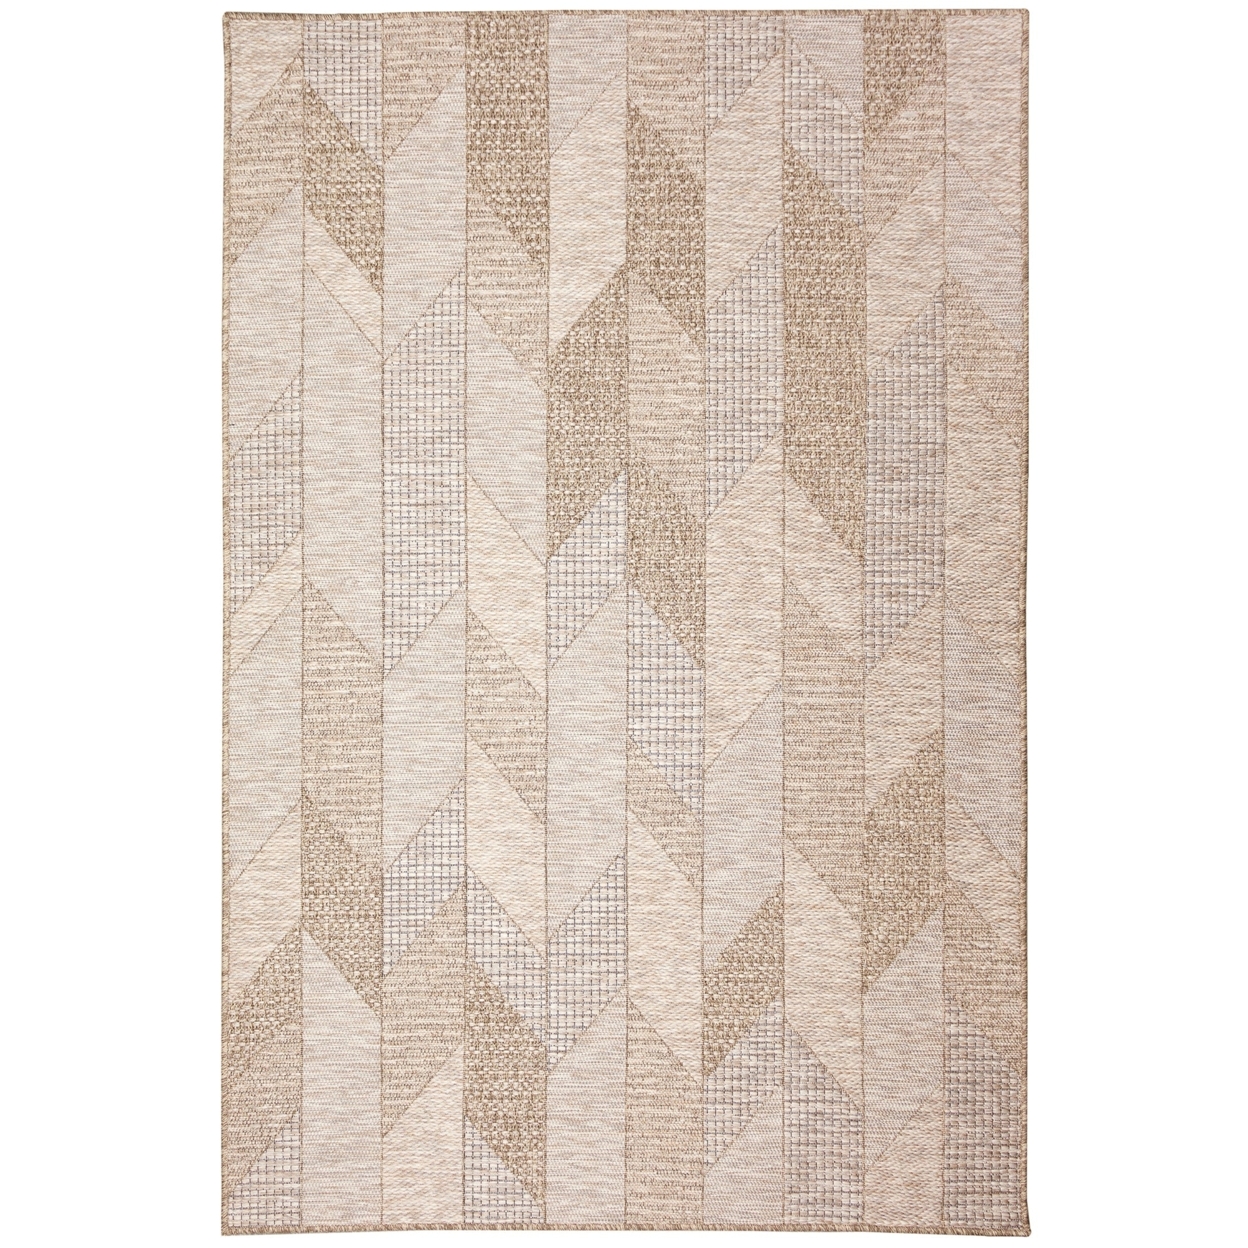 Liora Manne Orly Angles Indoor Outdoor Area Rug Natural - 3'3 X 4'11